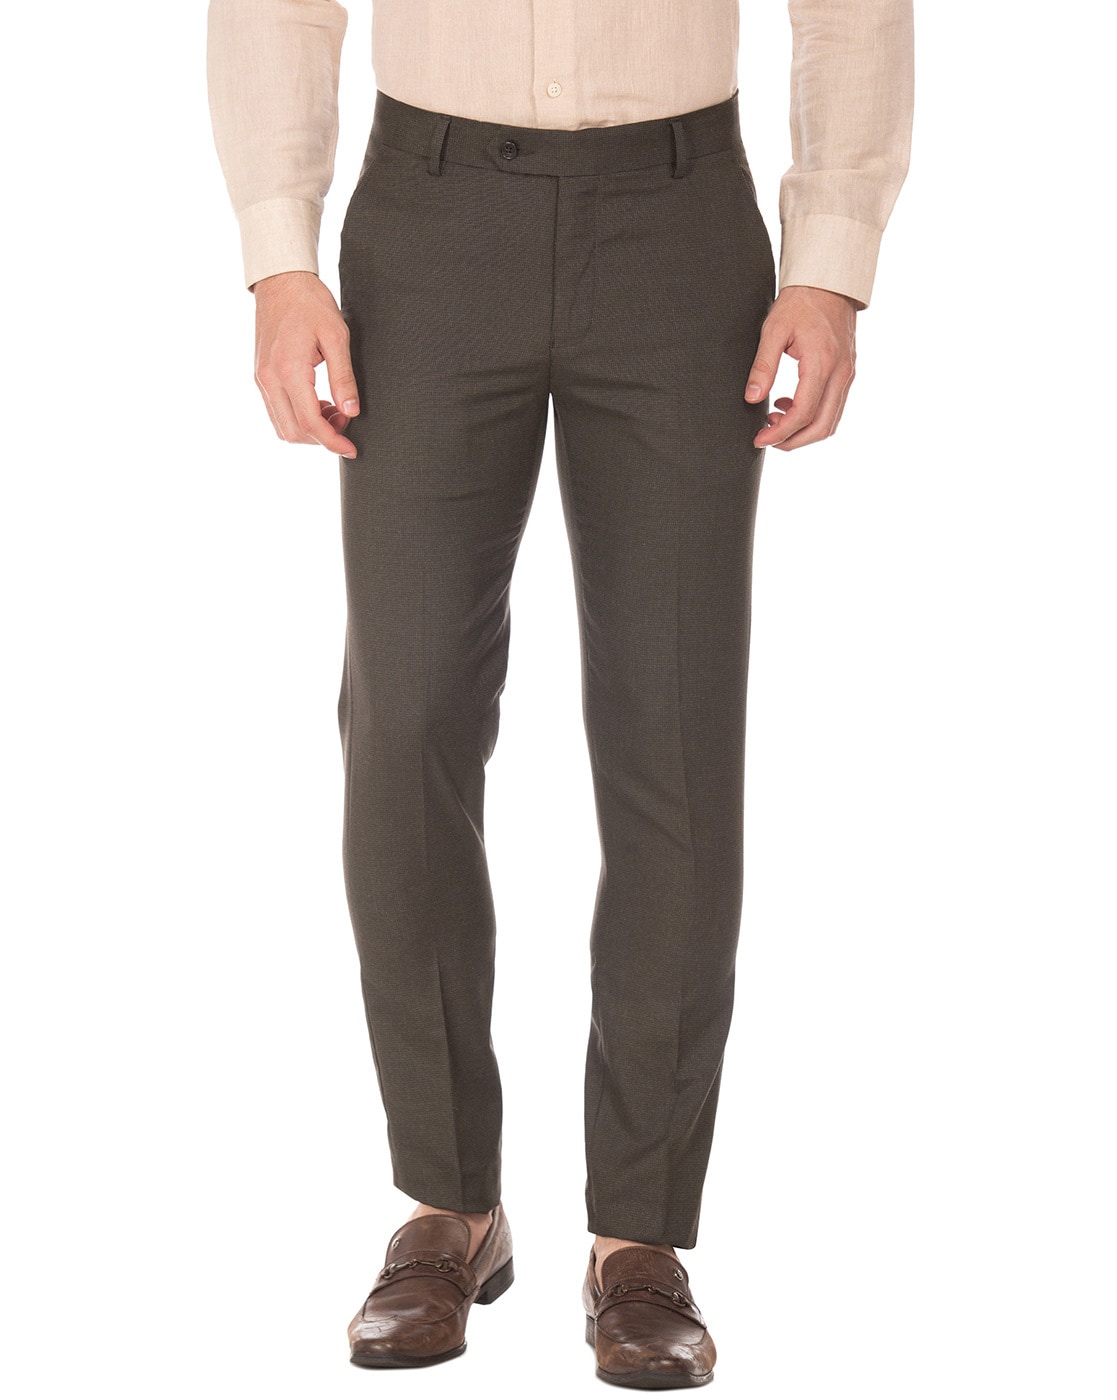 Excalibur Beige Slim -Fit Flat Trousers - Buy Excalibur Beige Slim -Fit  Flat Trousers Online at Best Prices in India on Snapdeal